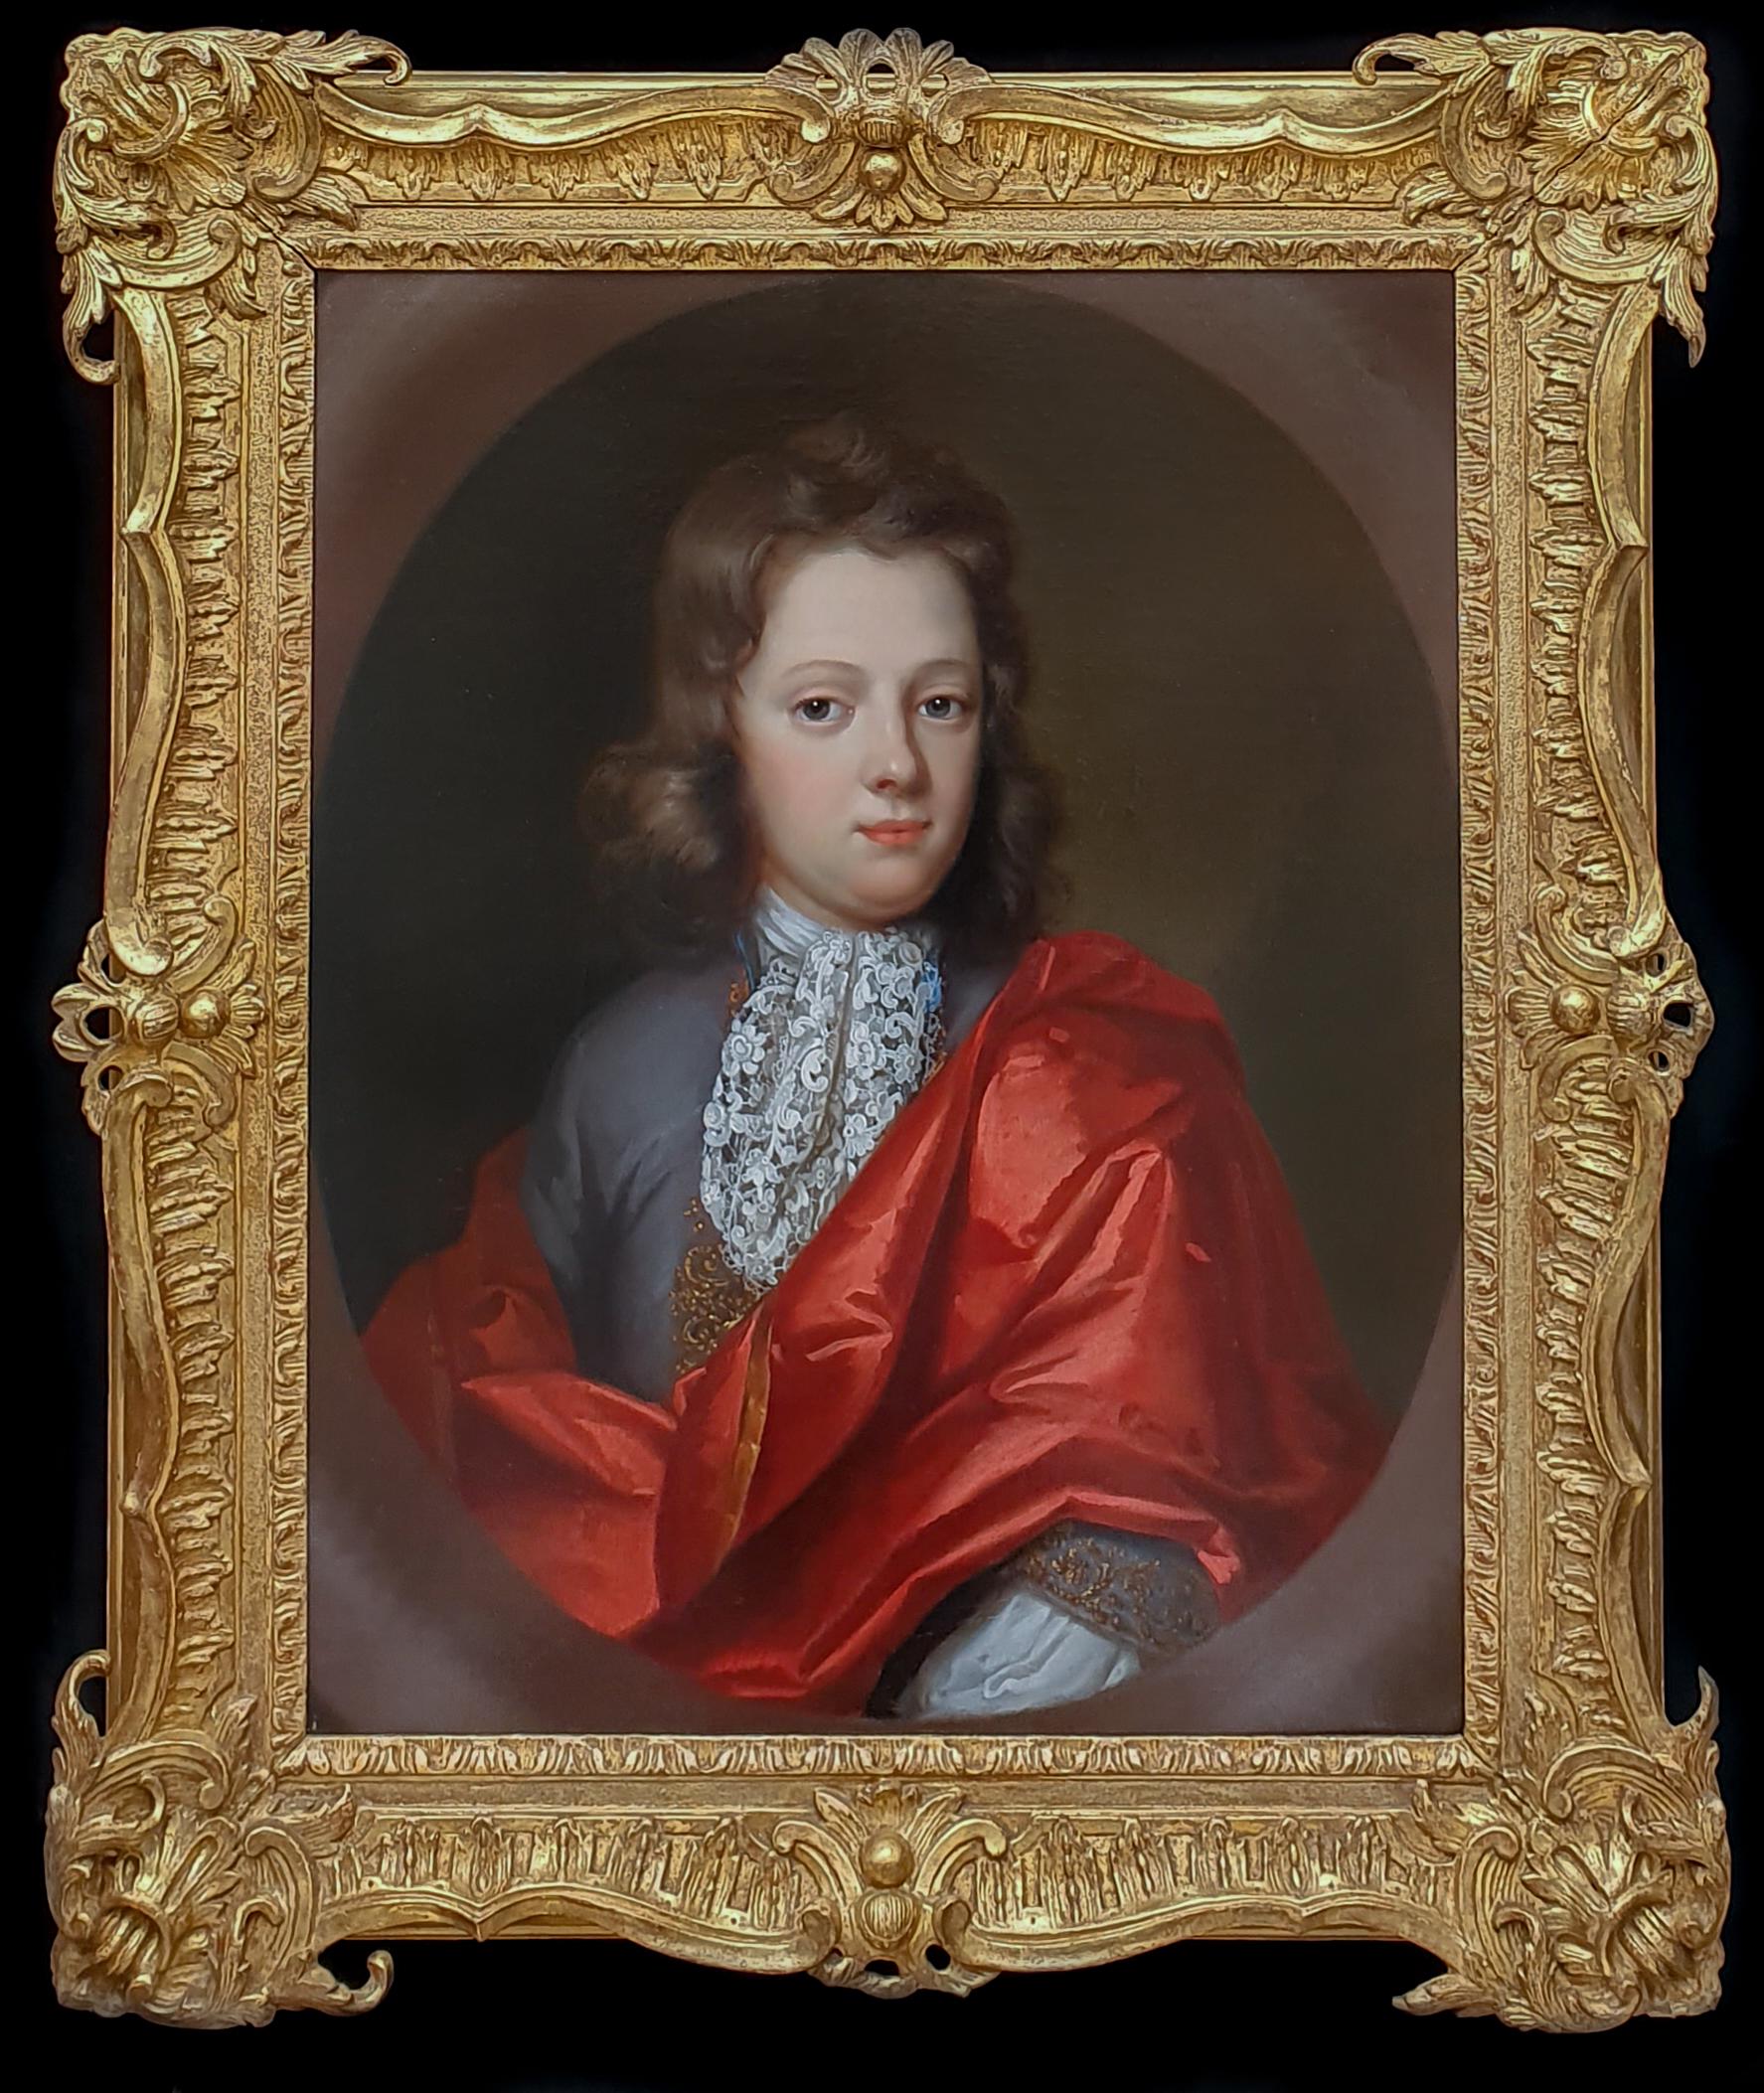 (Circle of) Sir Godfrey Kneller Portrait Painting - Portrait of a member of the Mellish family, Exquisite Quality, Fine Carved Frame